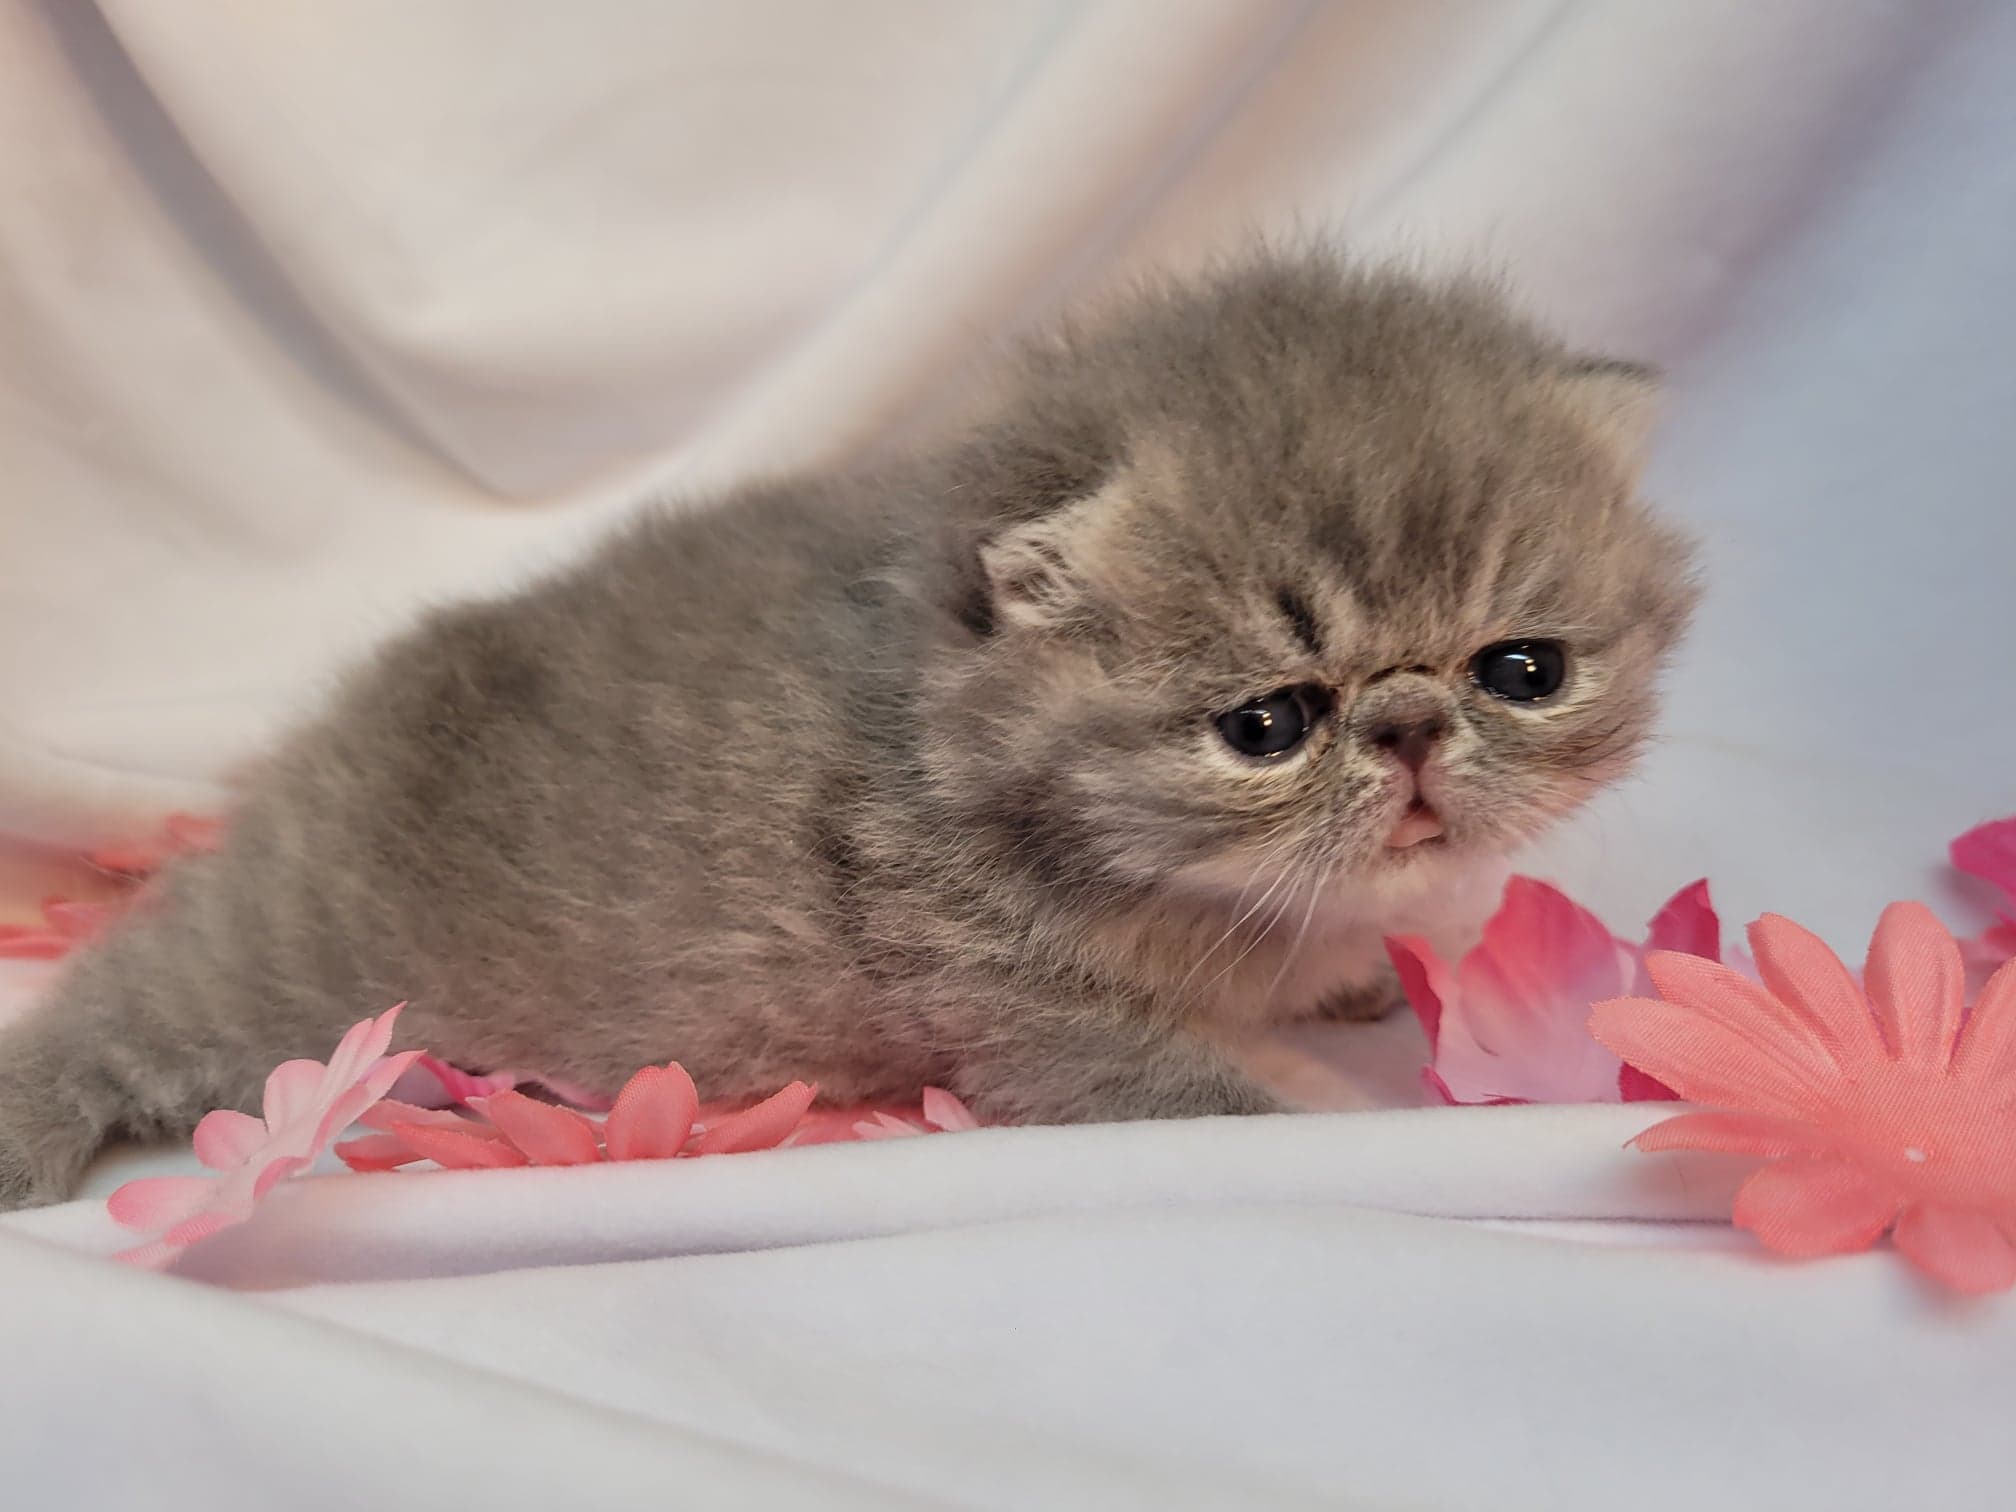 Kittens for Sale Near Me  Cats For Sale - The Persian Kittens